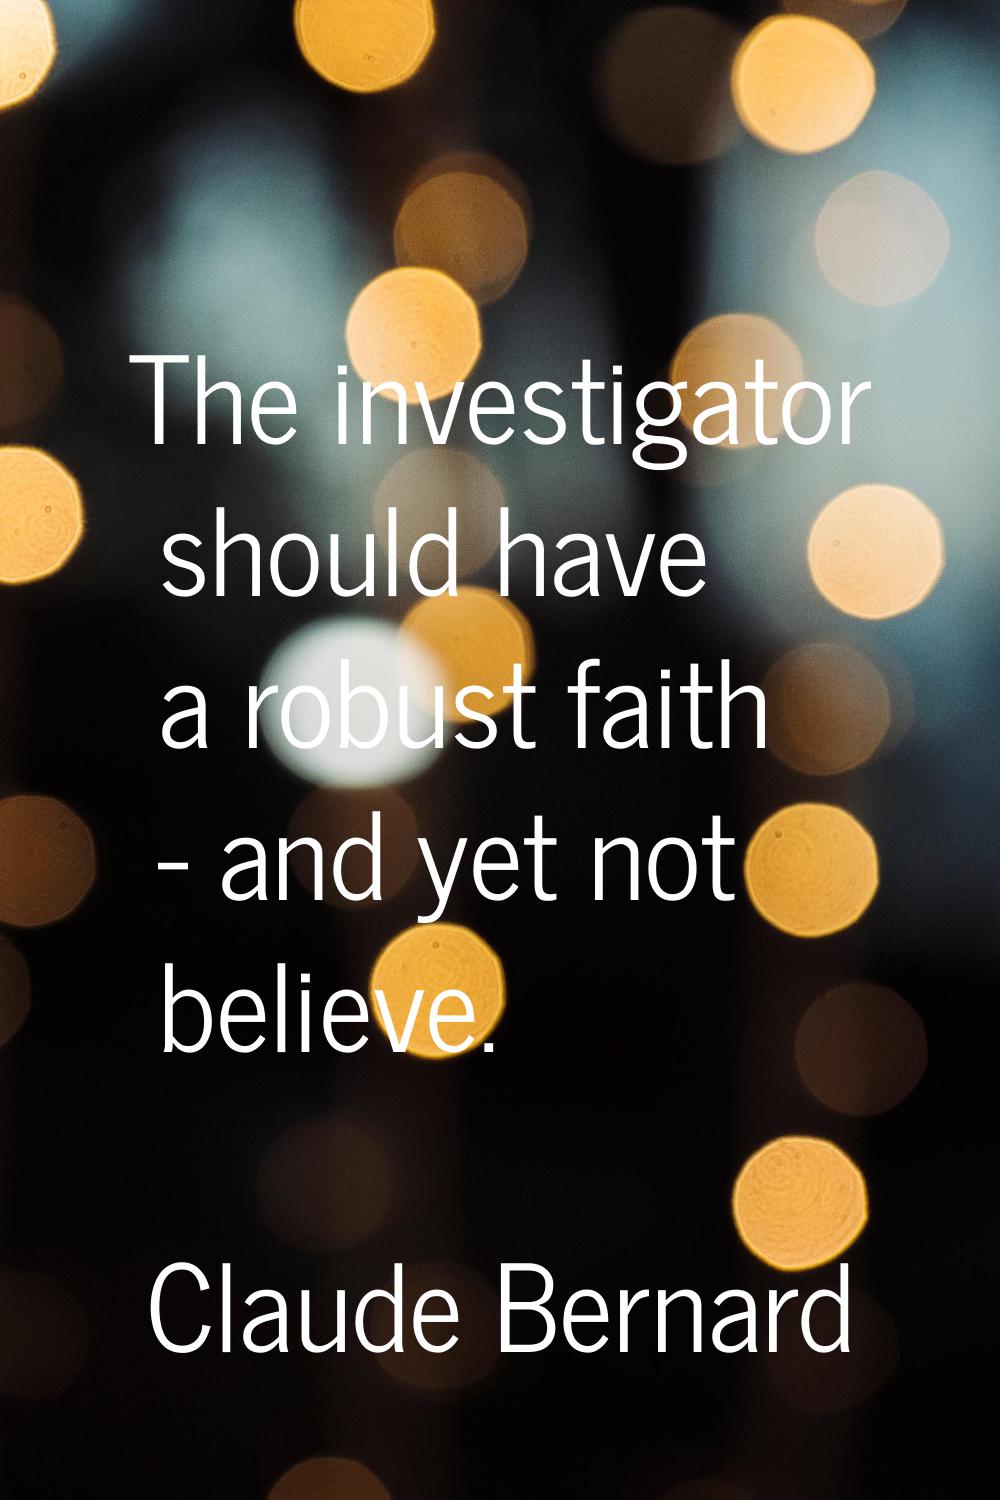 The investigator should have a robust faith - and yet not believe.